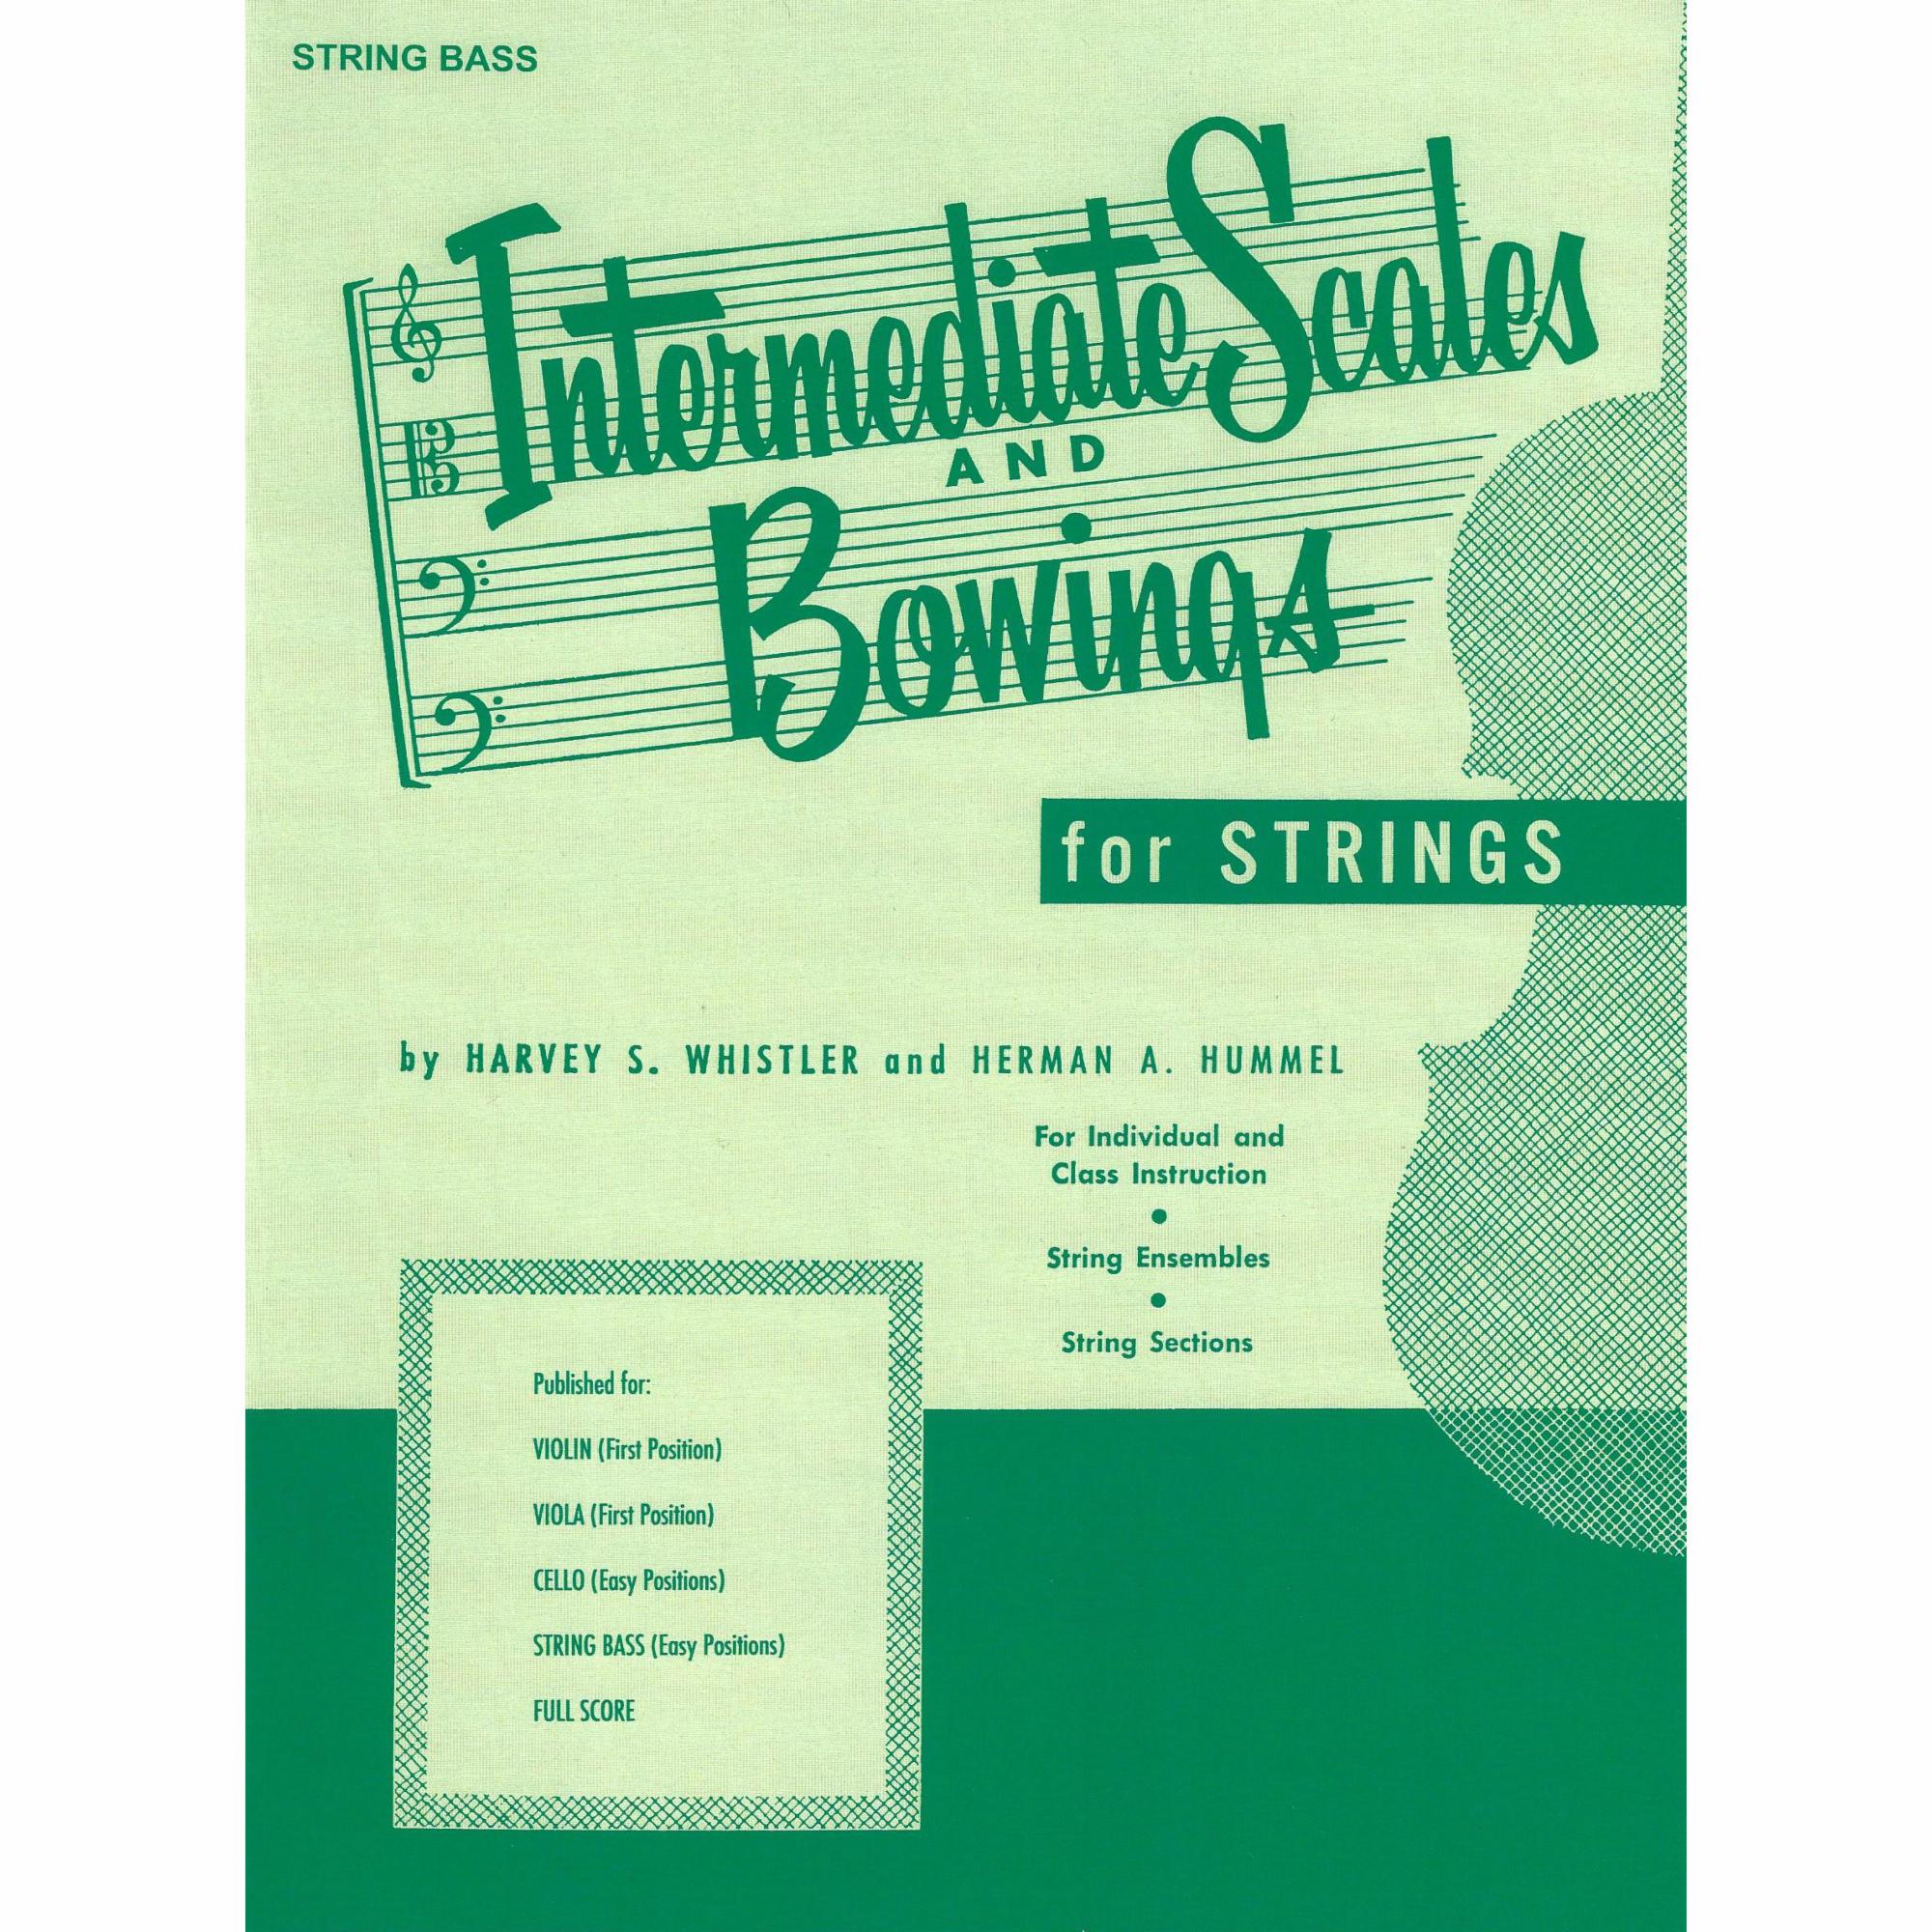 Intermediate Scales and Bowings for String Bass